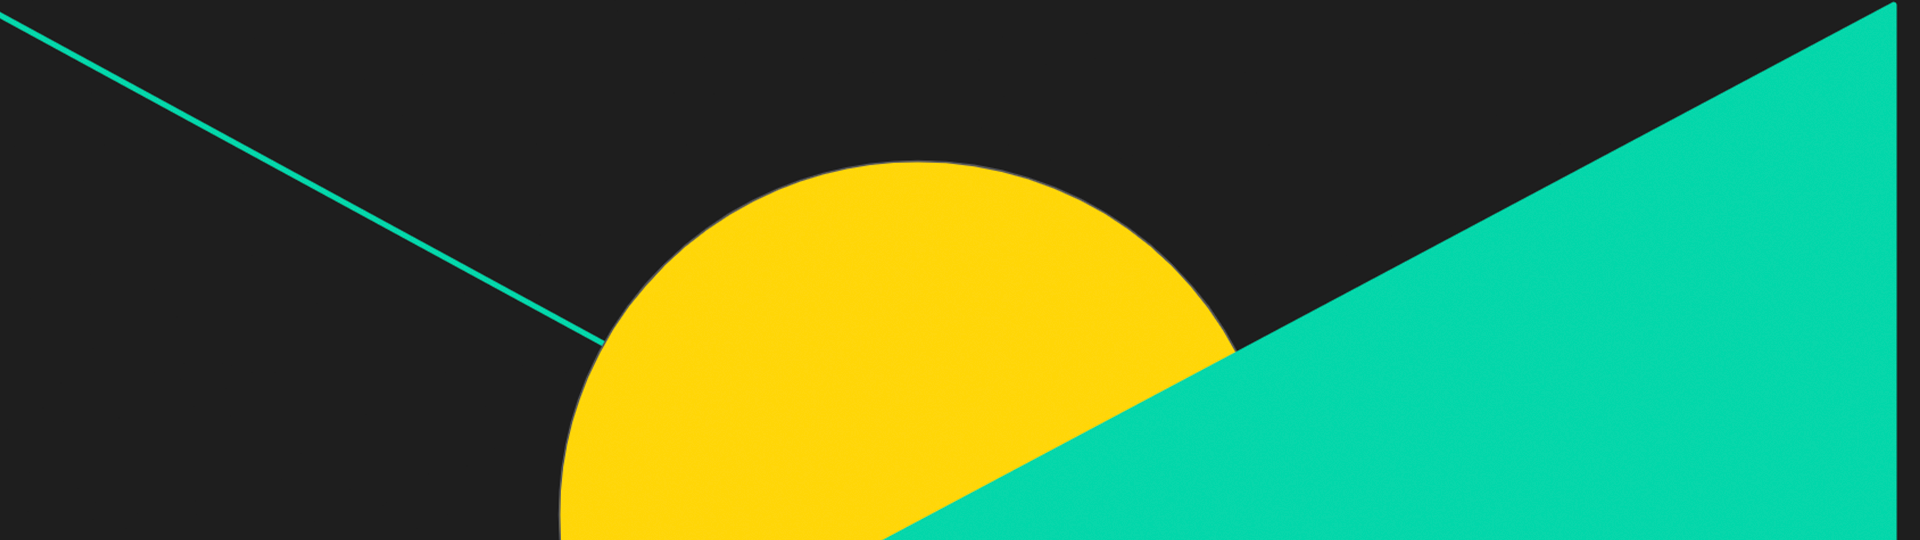 yellow circle with a teal angle overlapping on the right